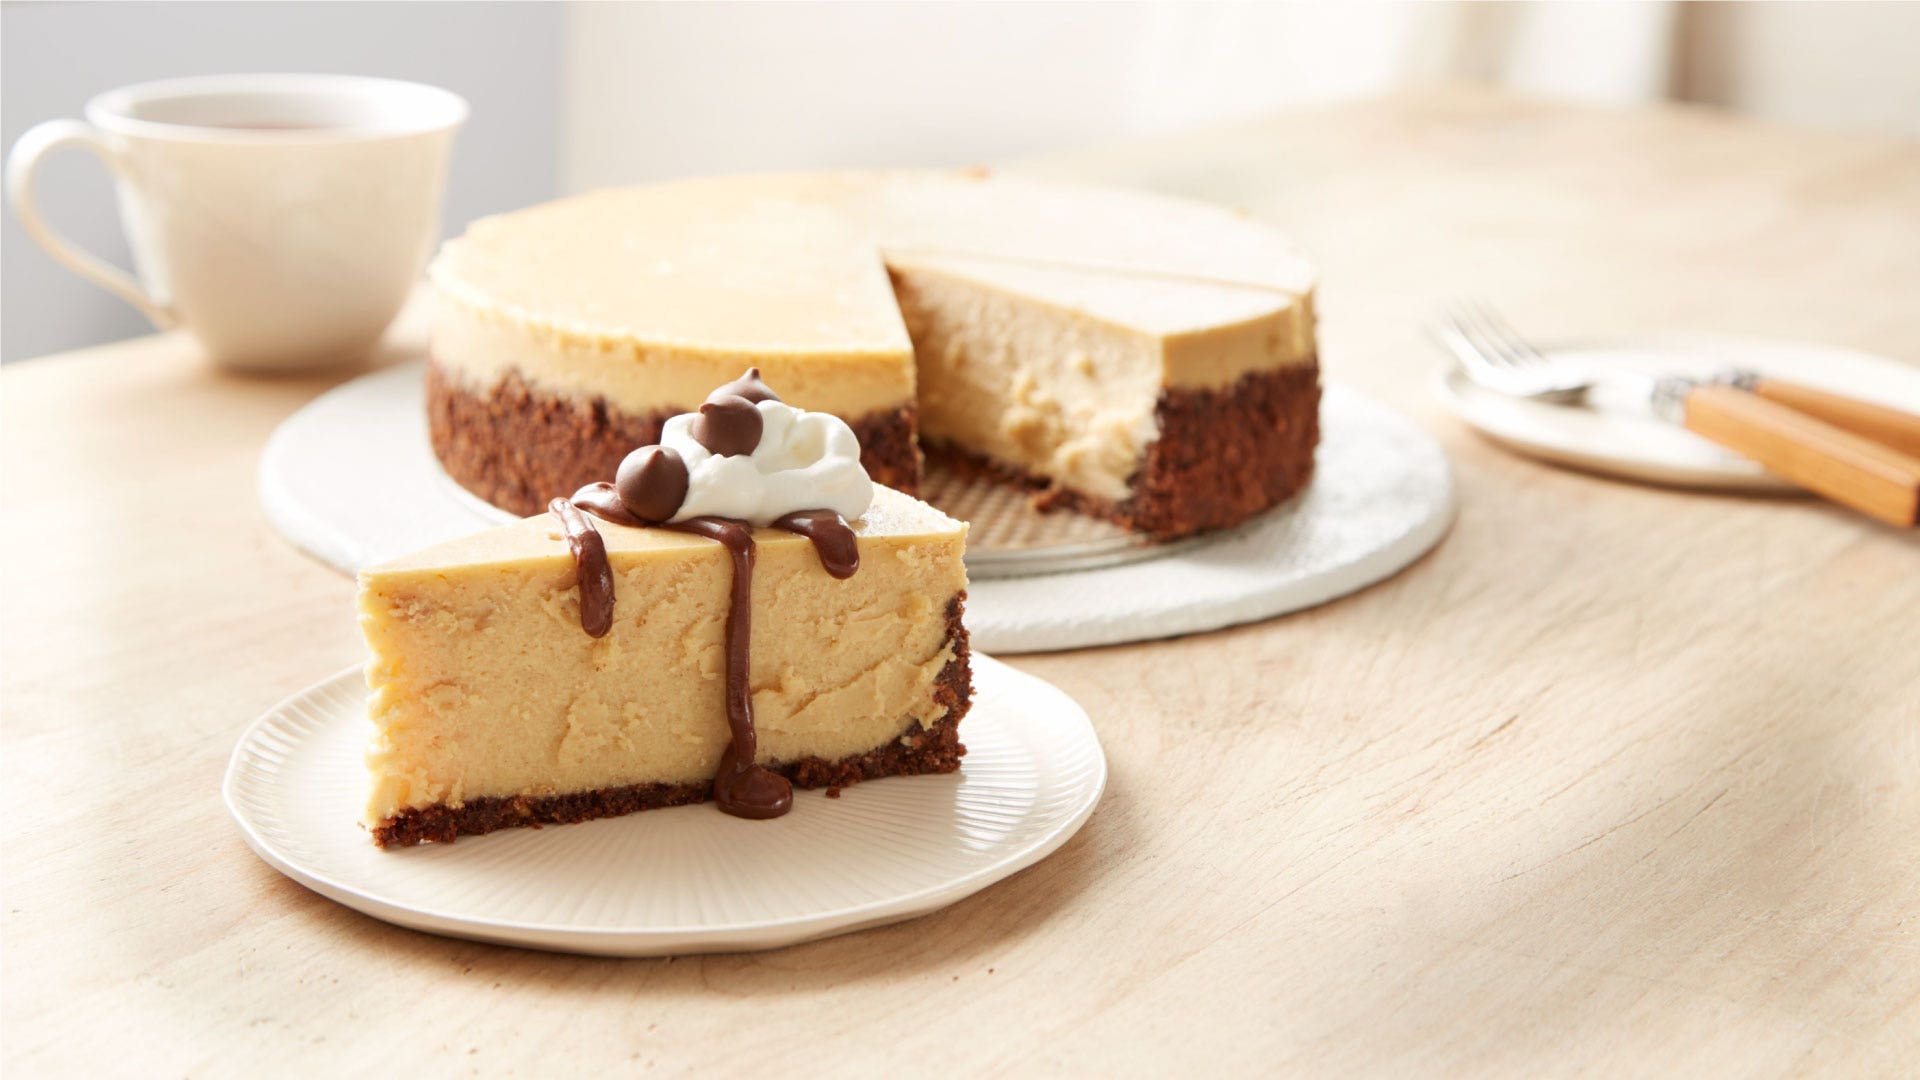 REESE'S Chocolate Peanut Butter Cheesecake